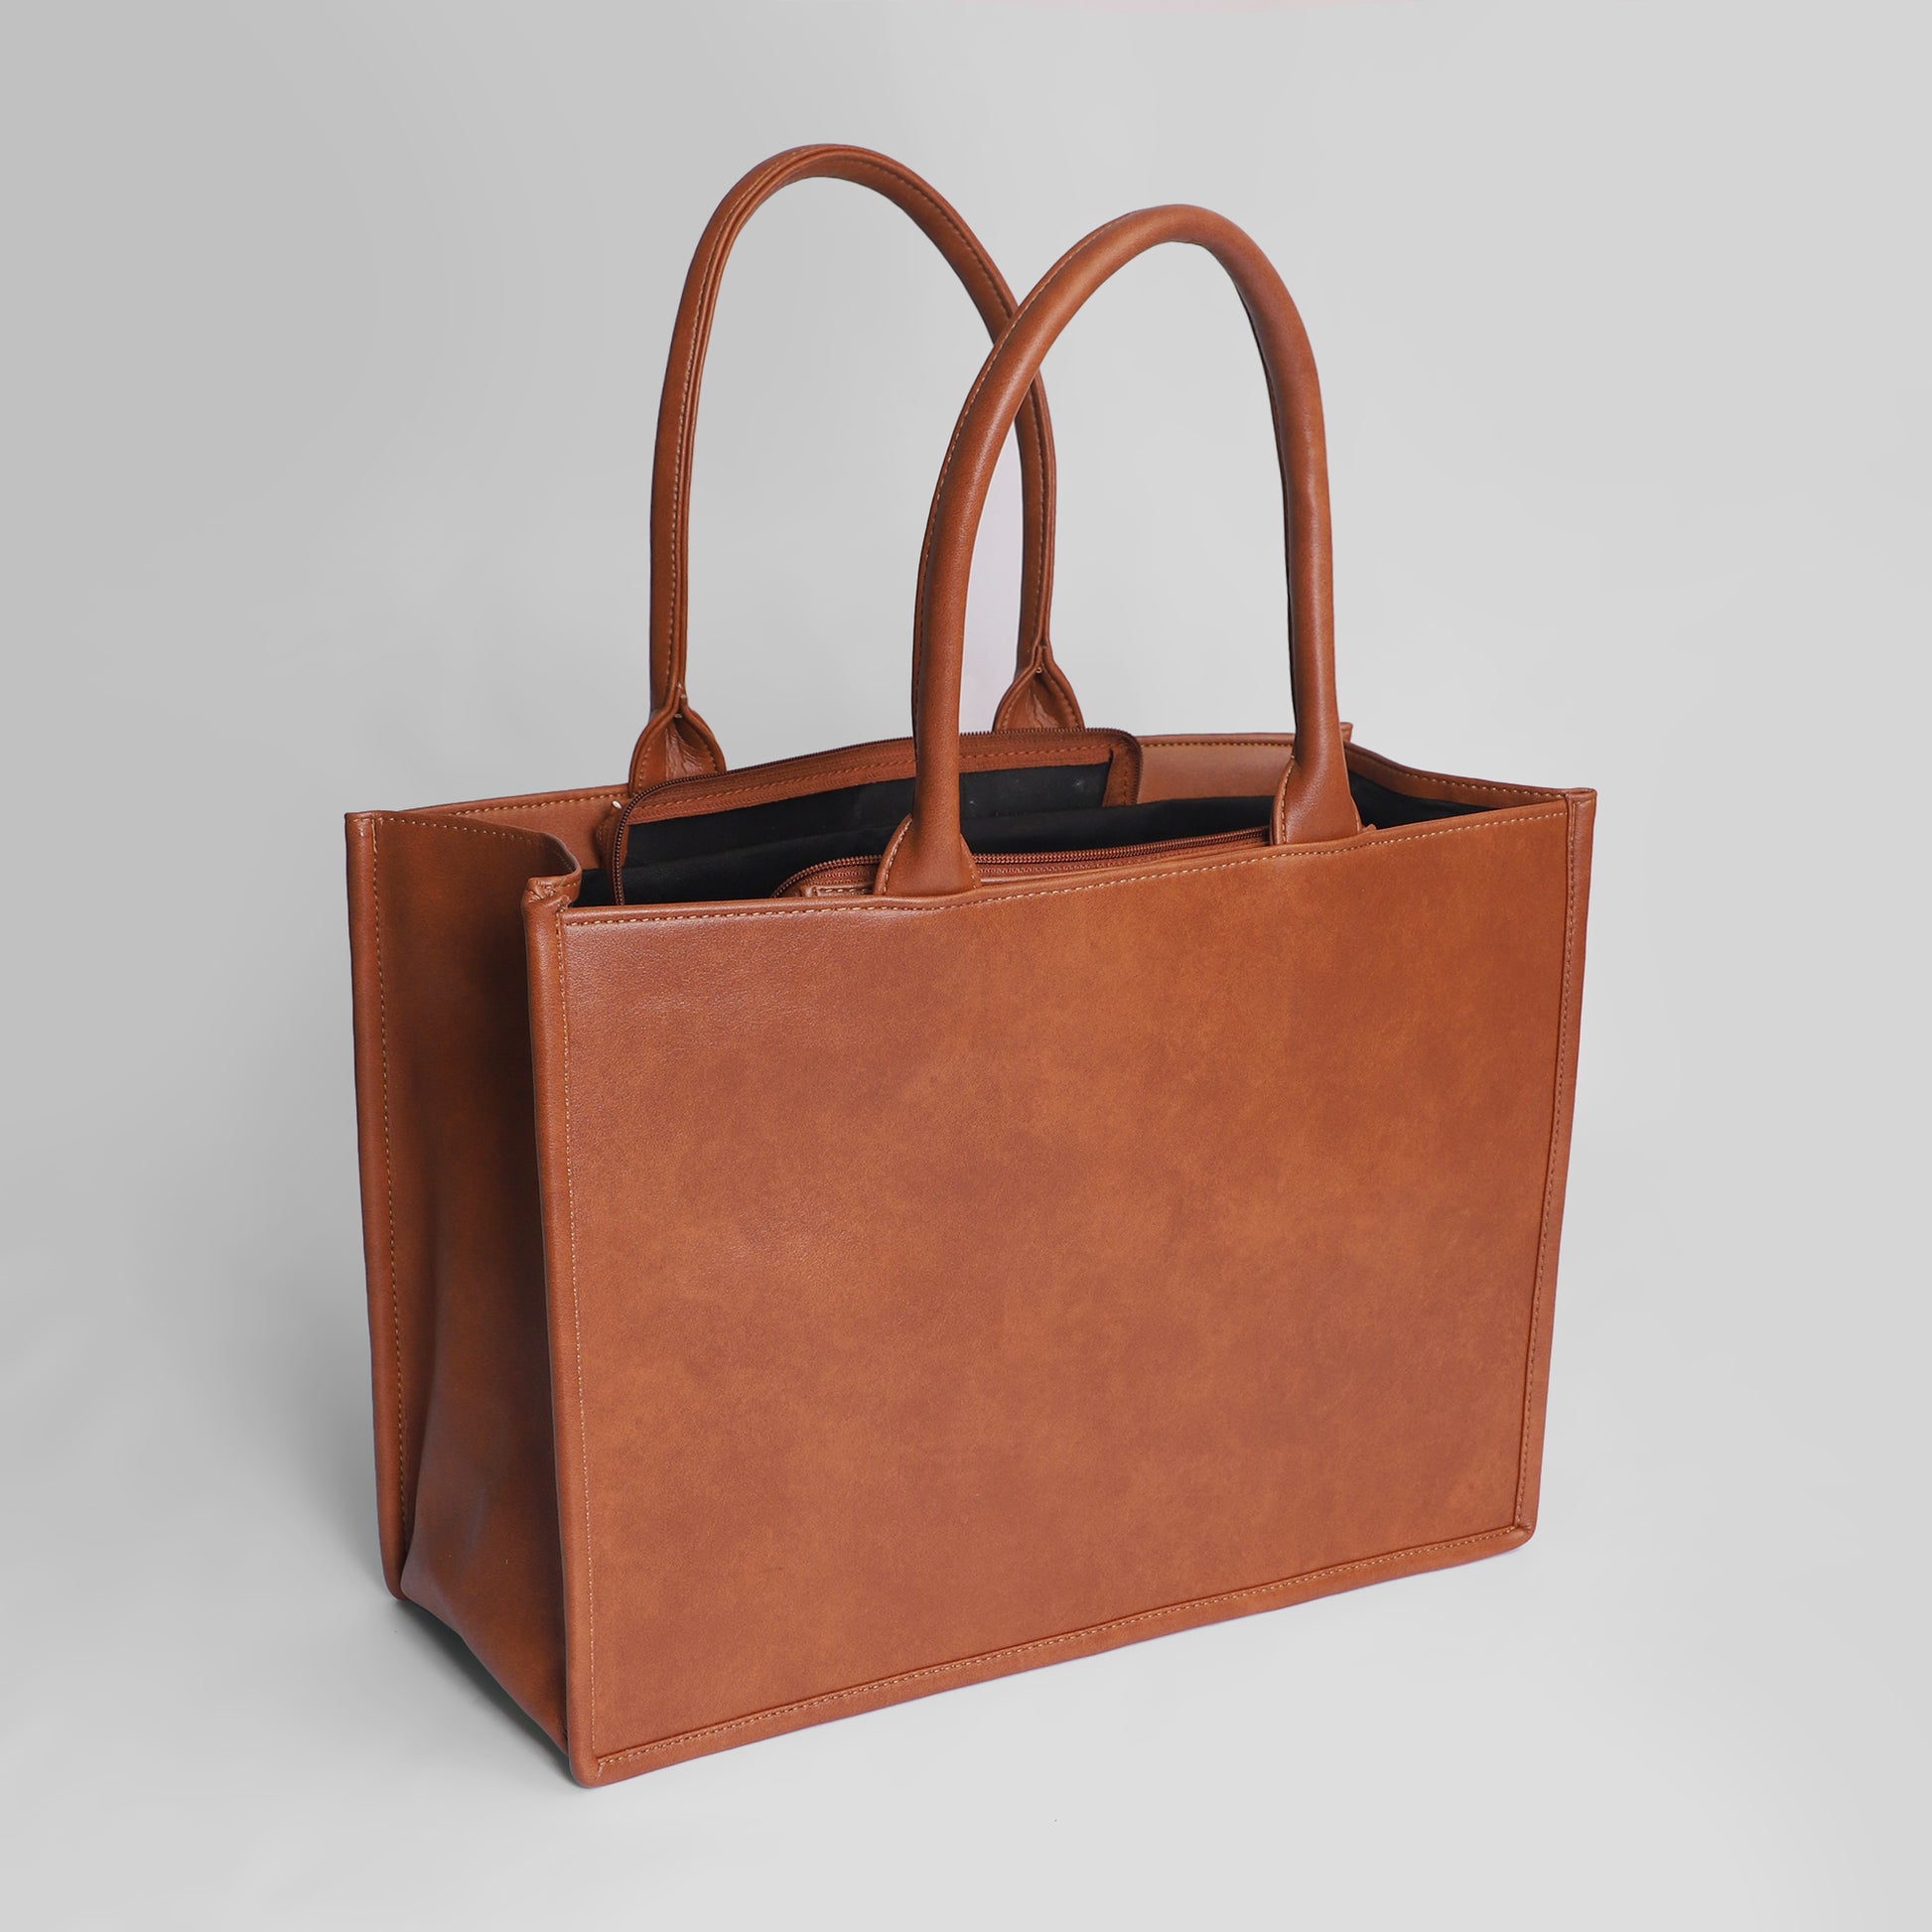 Carry All Tote Bag Canvas  Leather  Brandless